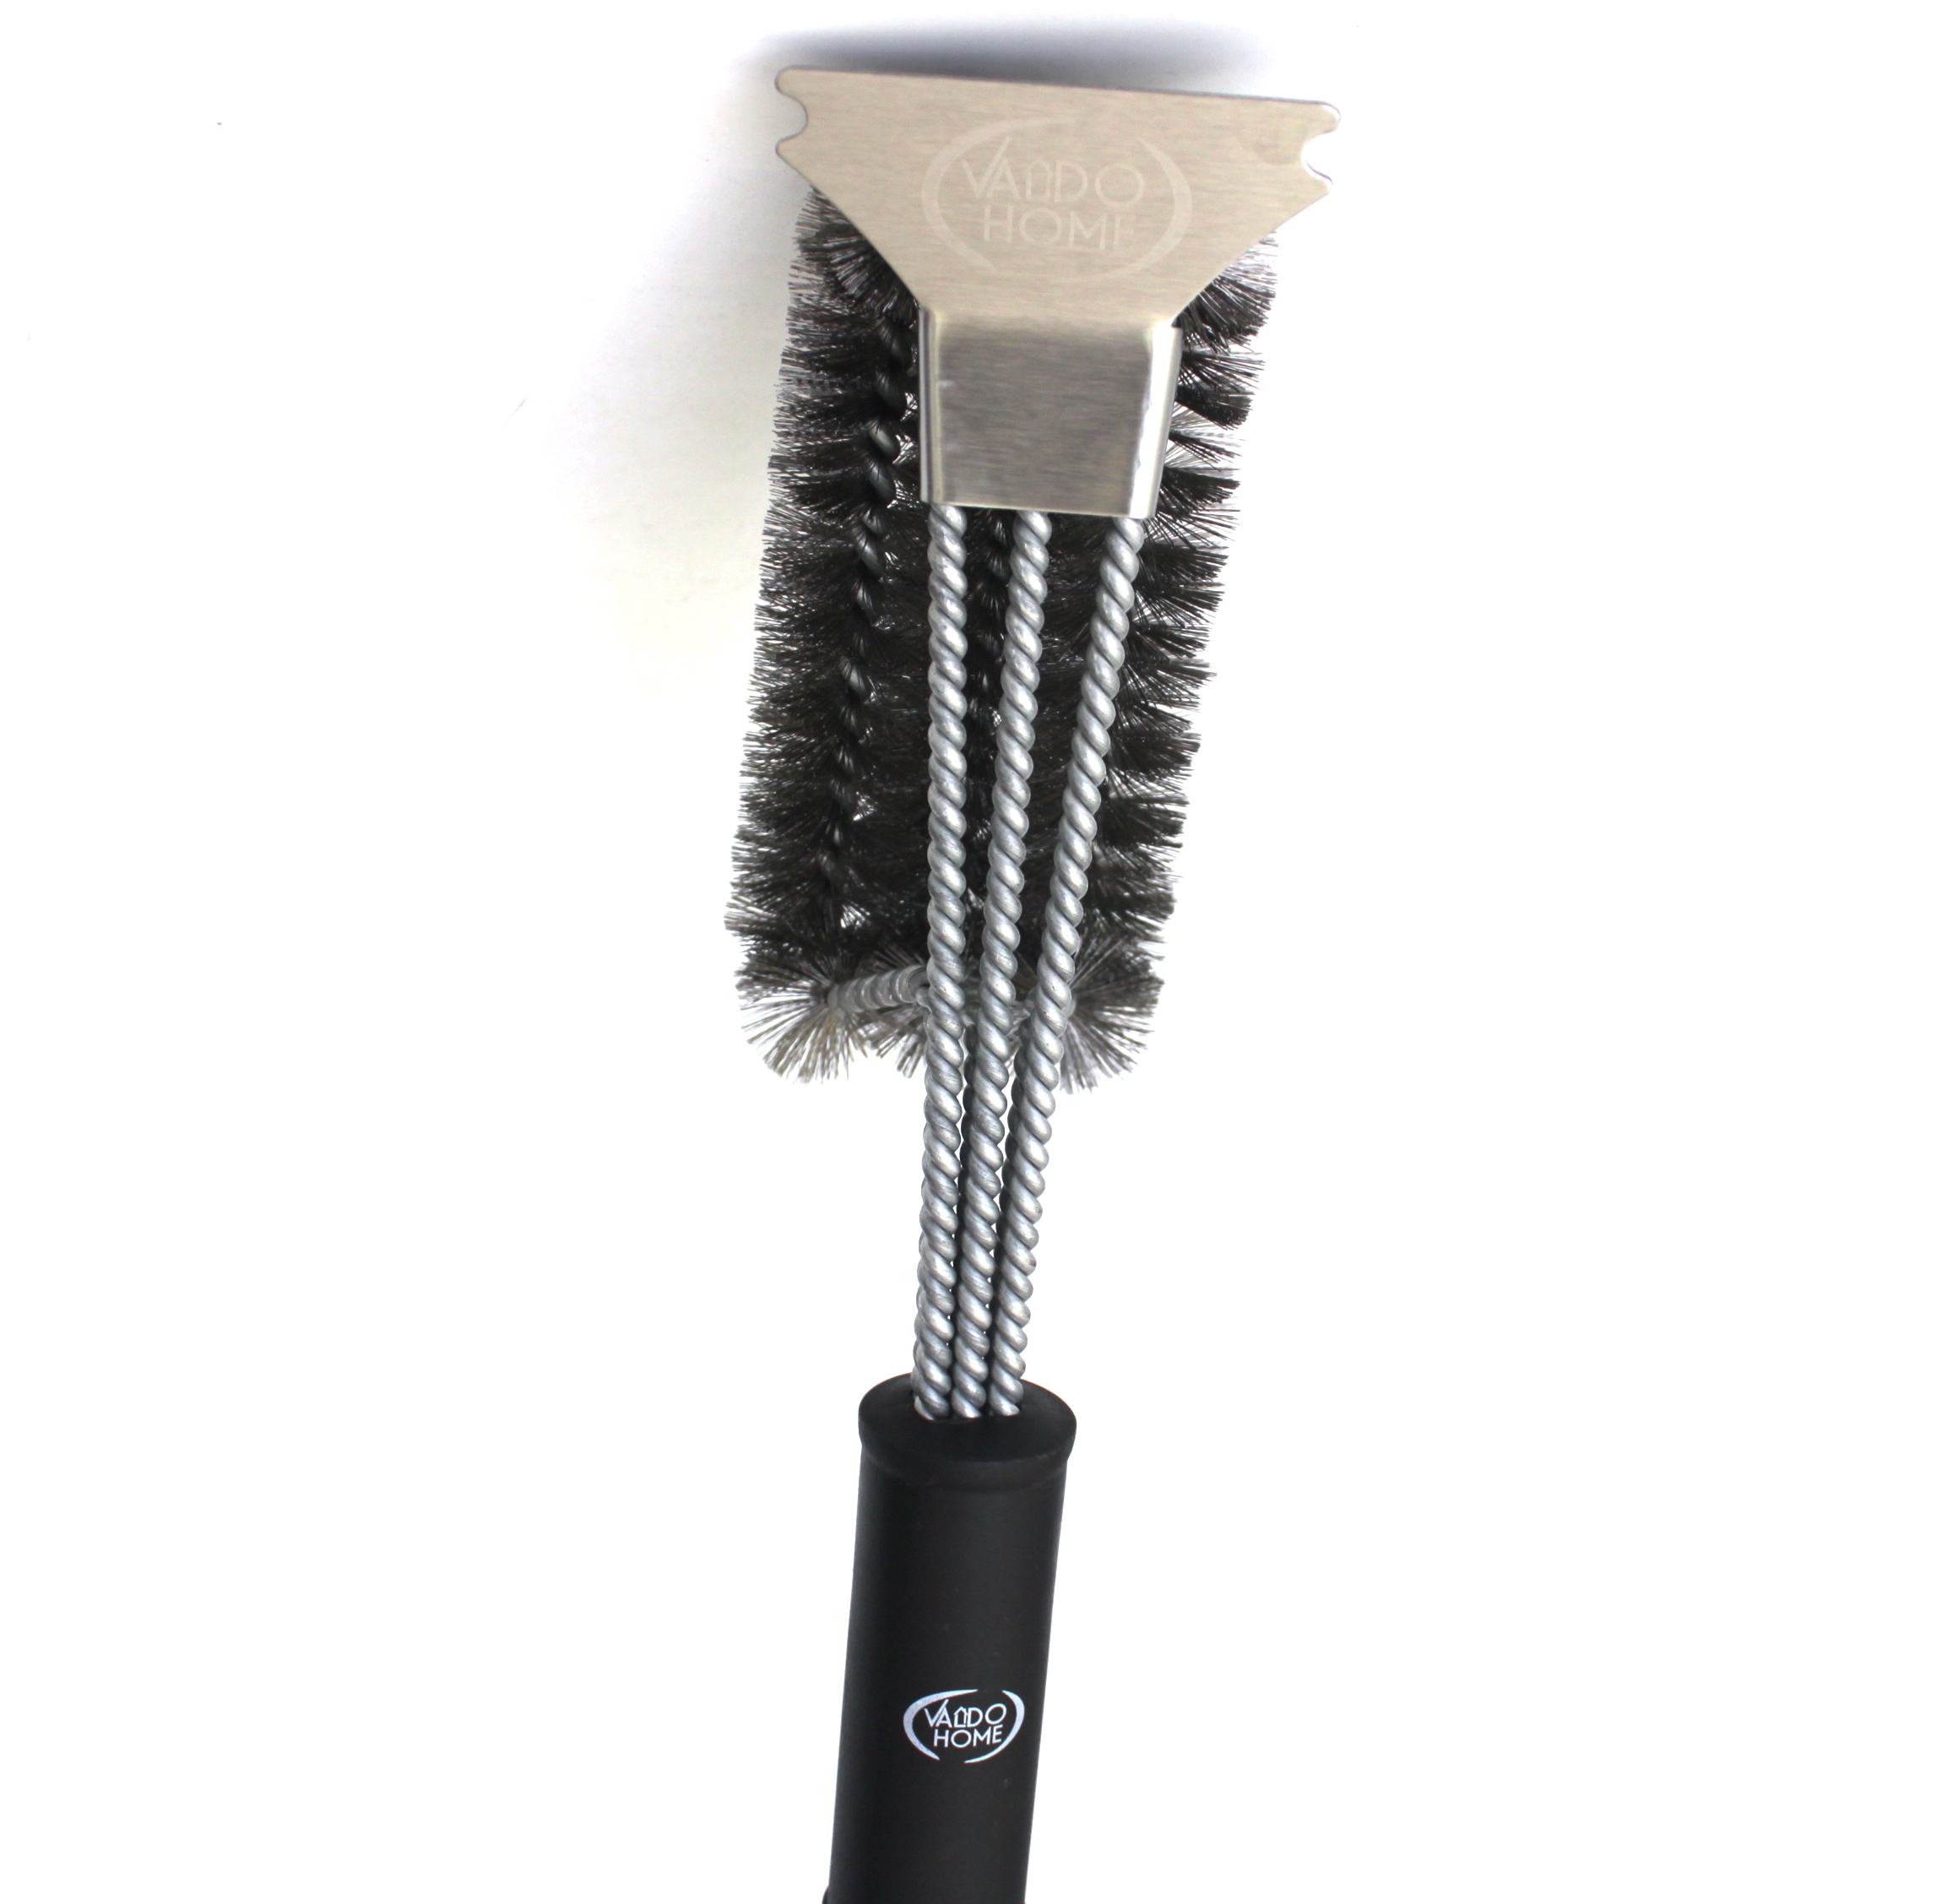 Grillaholics Stainless Steel Grill Brush, Clean Up to 5x Faster!